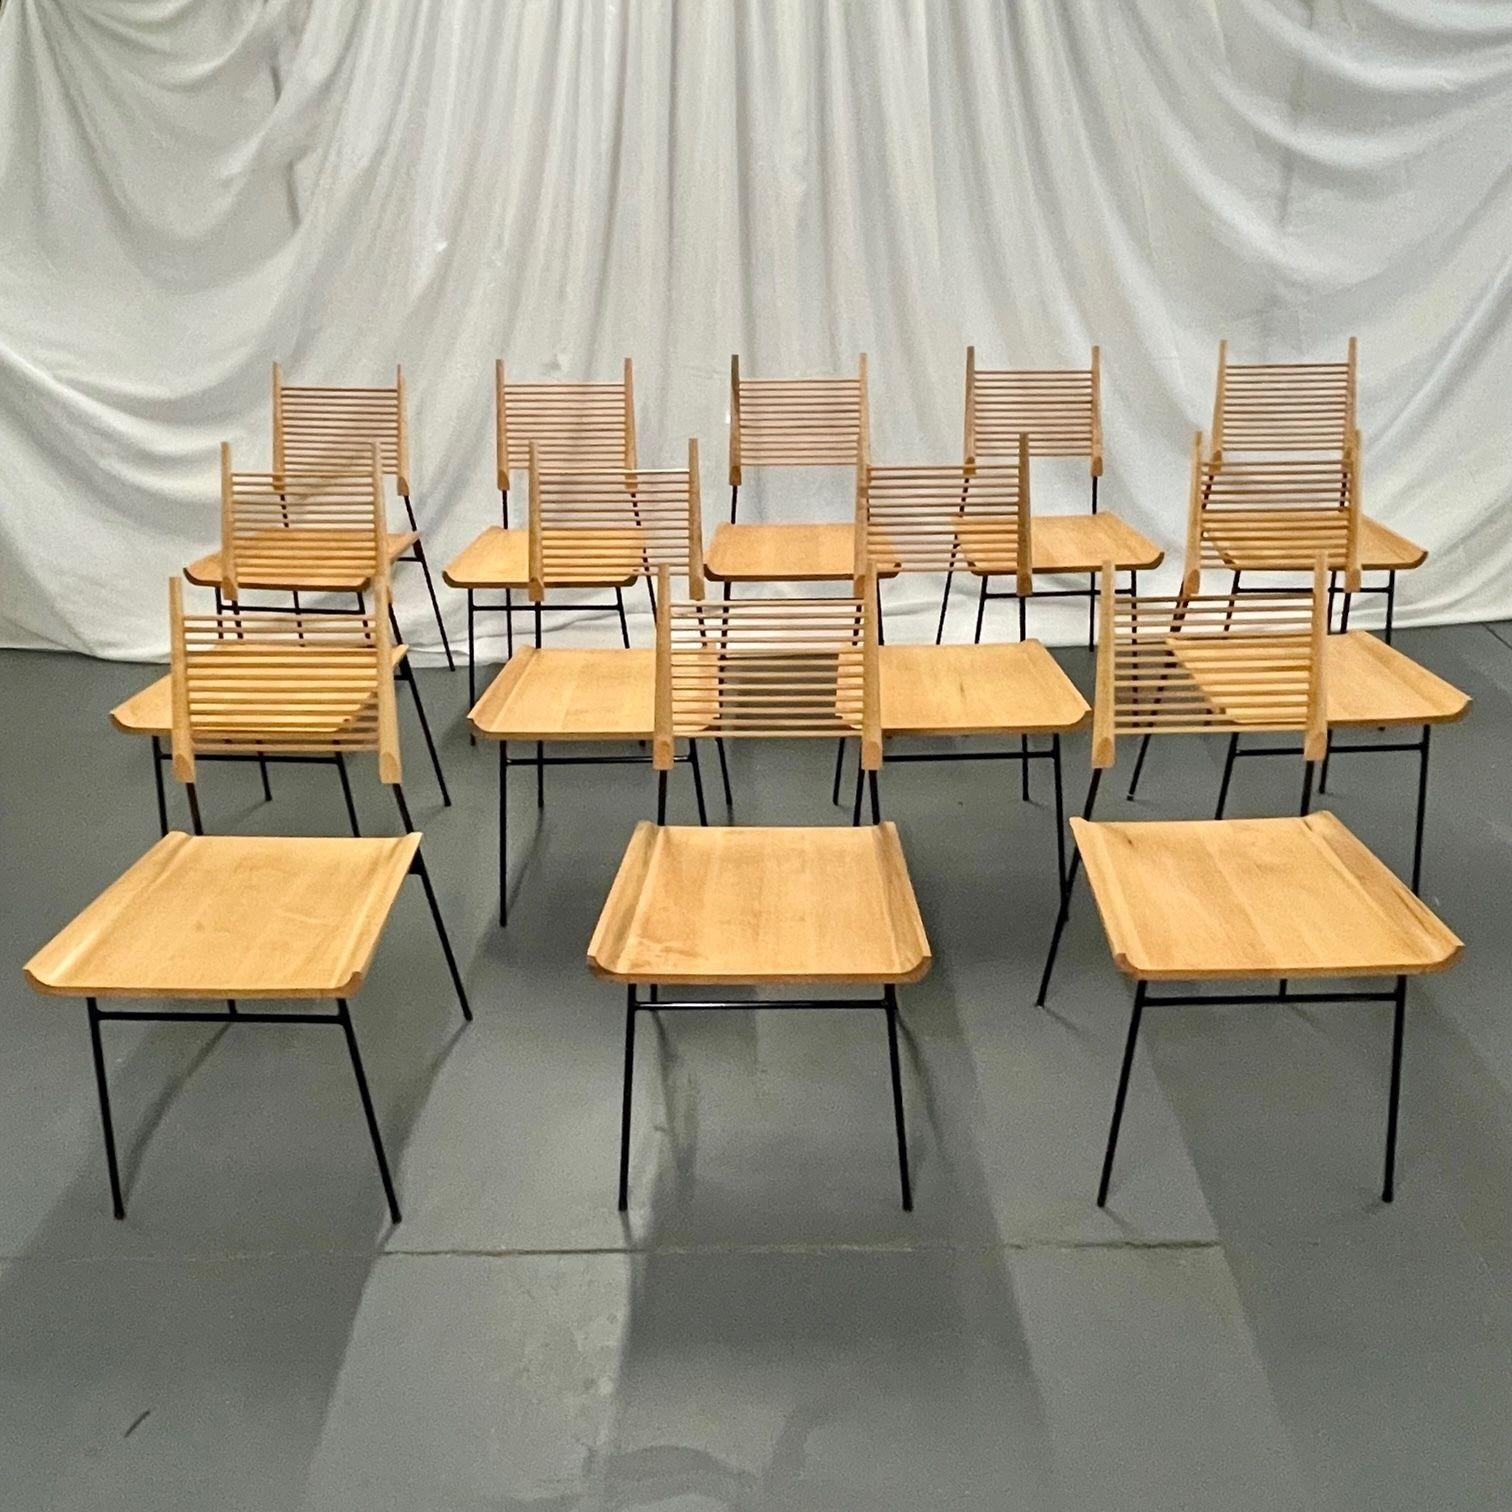 Iron Set of 12 Mid-Century Modern Paul McCobb Side / Dining Chairs, 'Shovel' Chairs For Sale